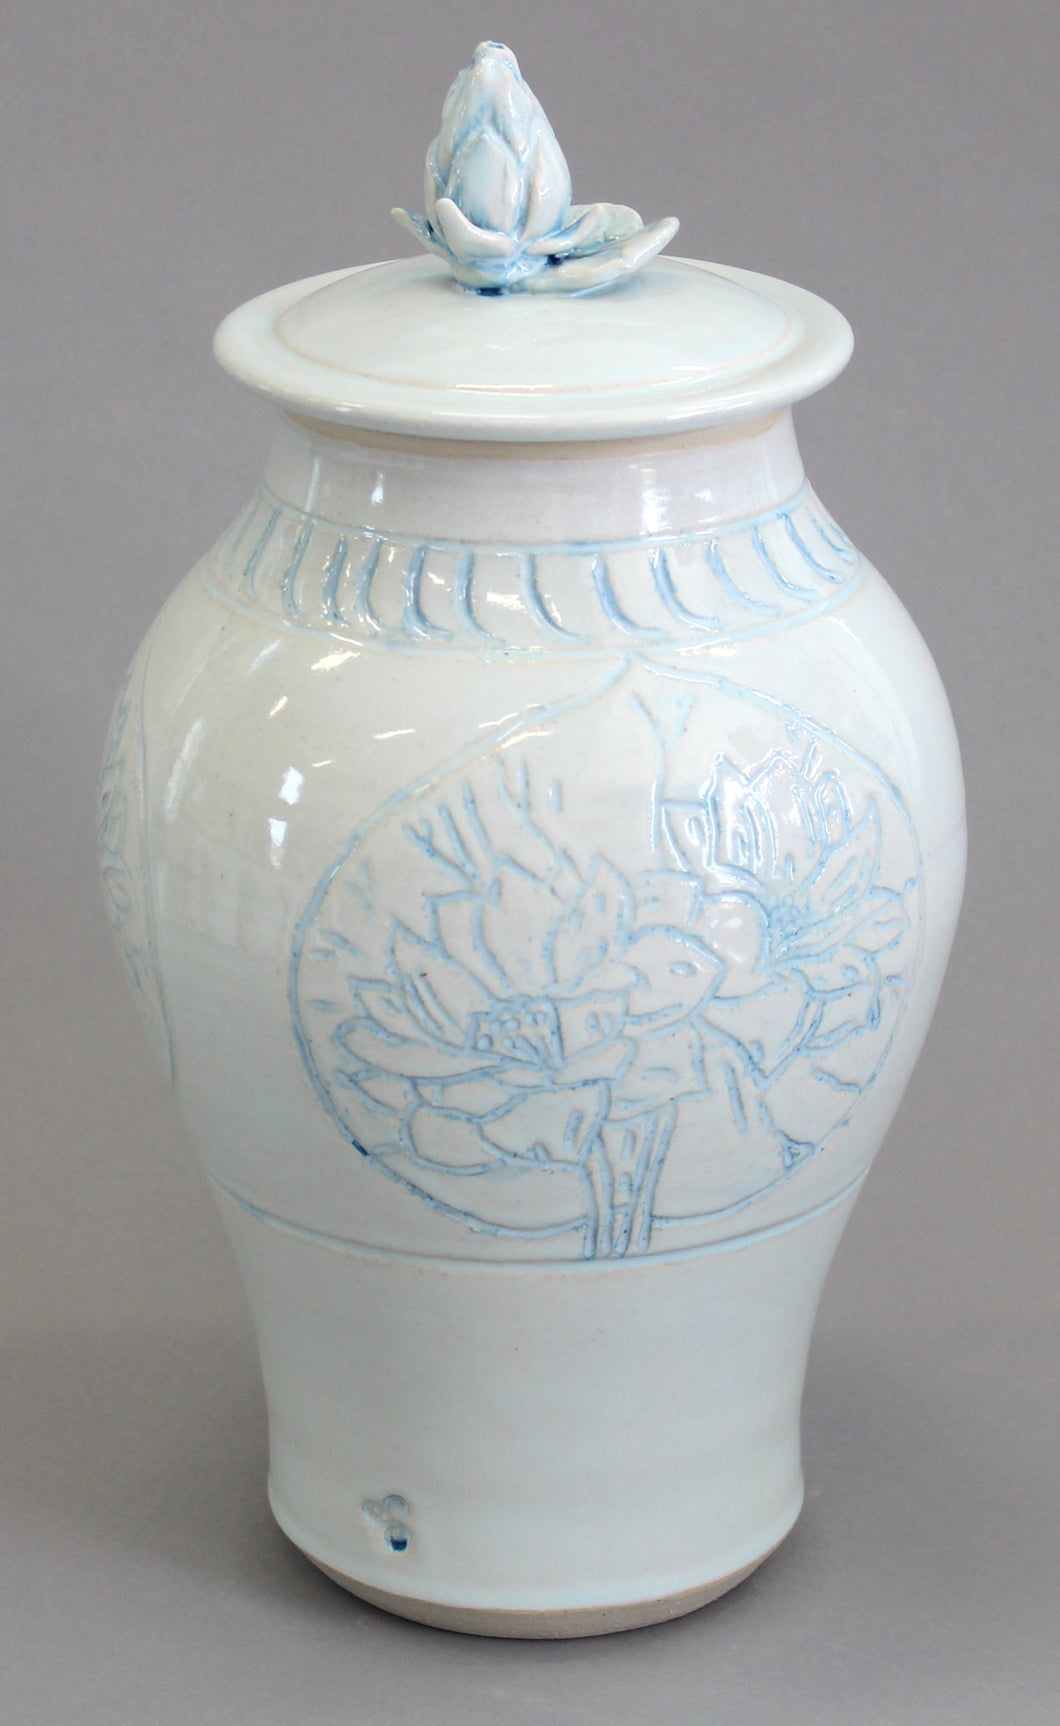 Tall Soft Blue with Turquoise Highlights Lotus Jar